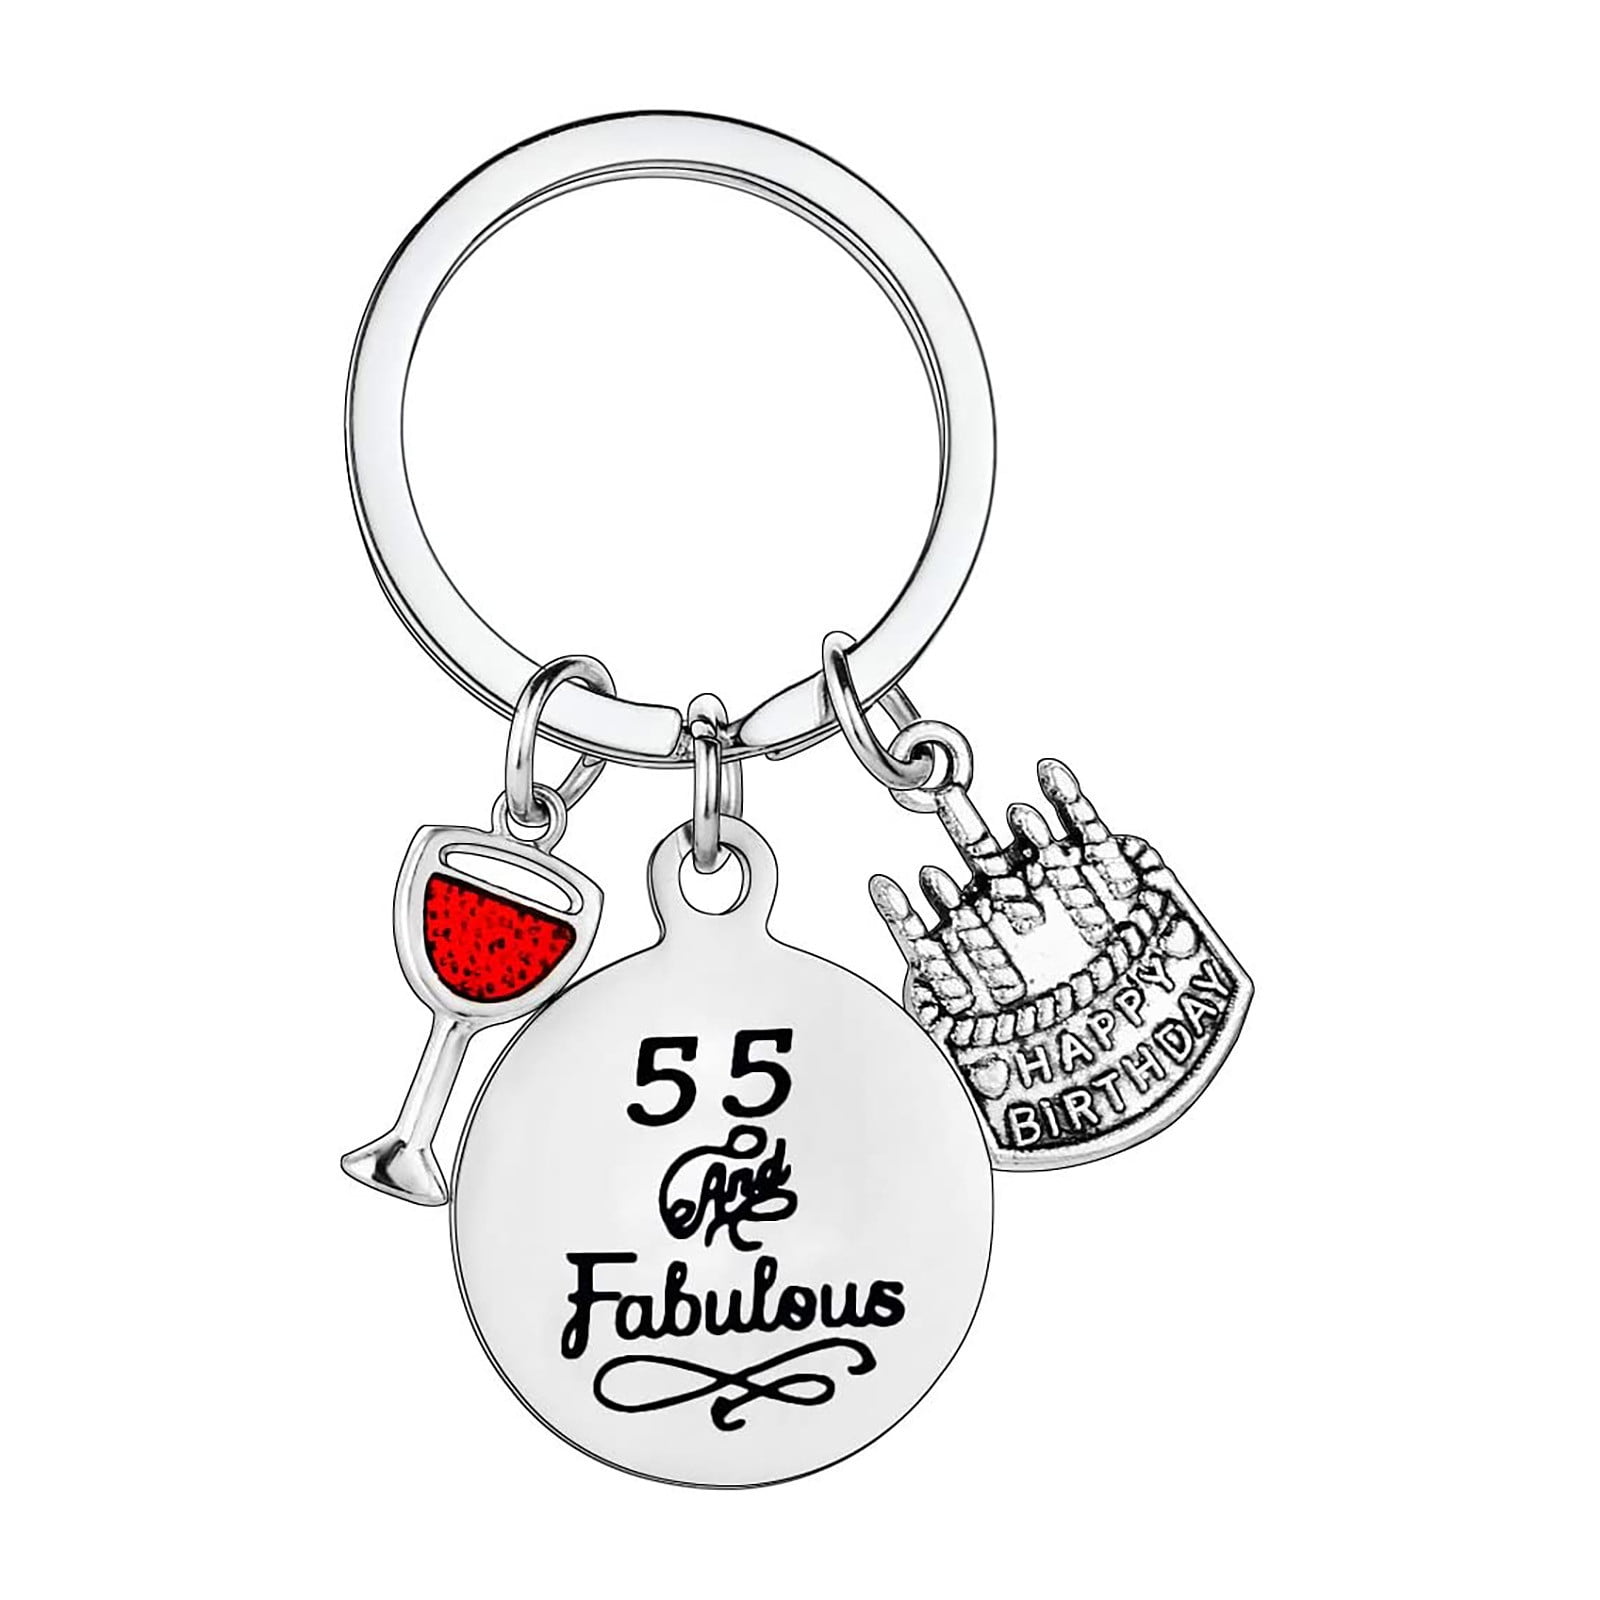 18th Birthday KeyRing Hand Crafted Pewter Key Ring in pouch Gift Idea 